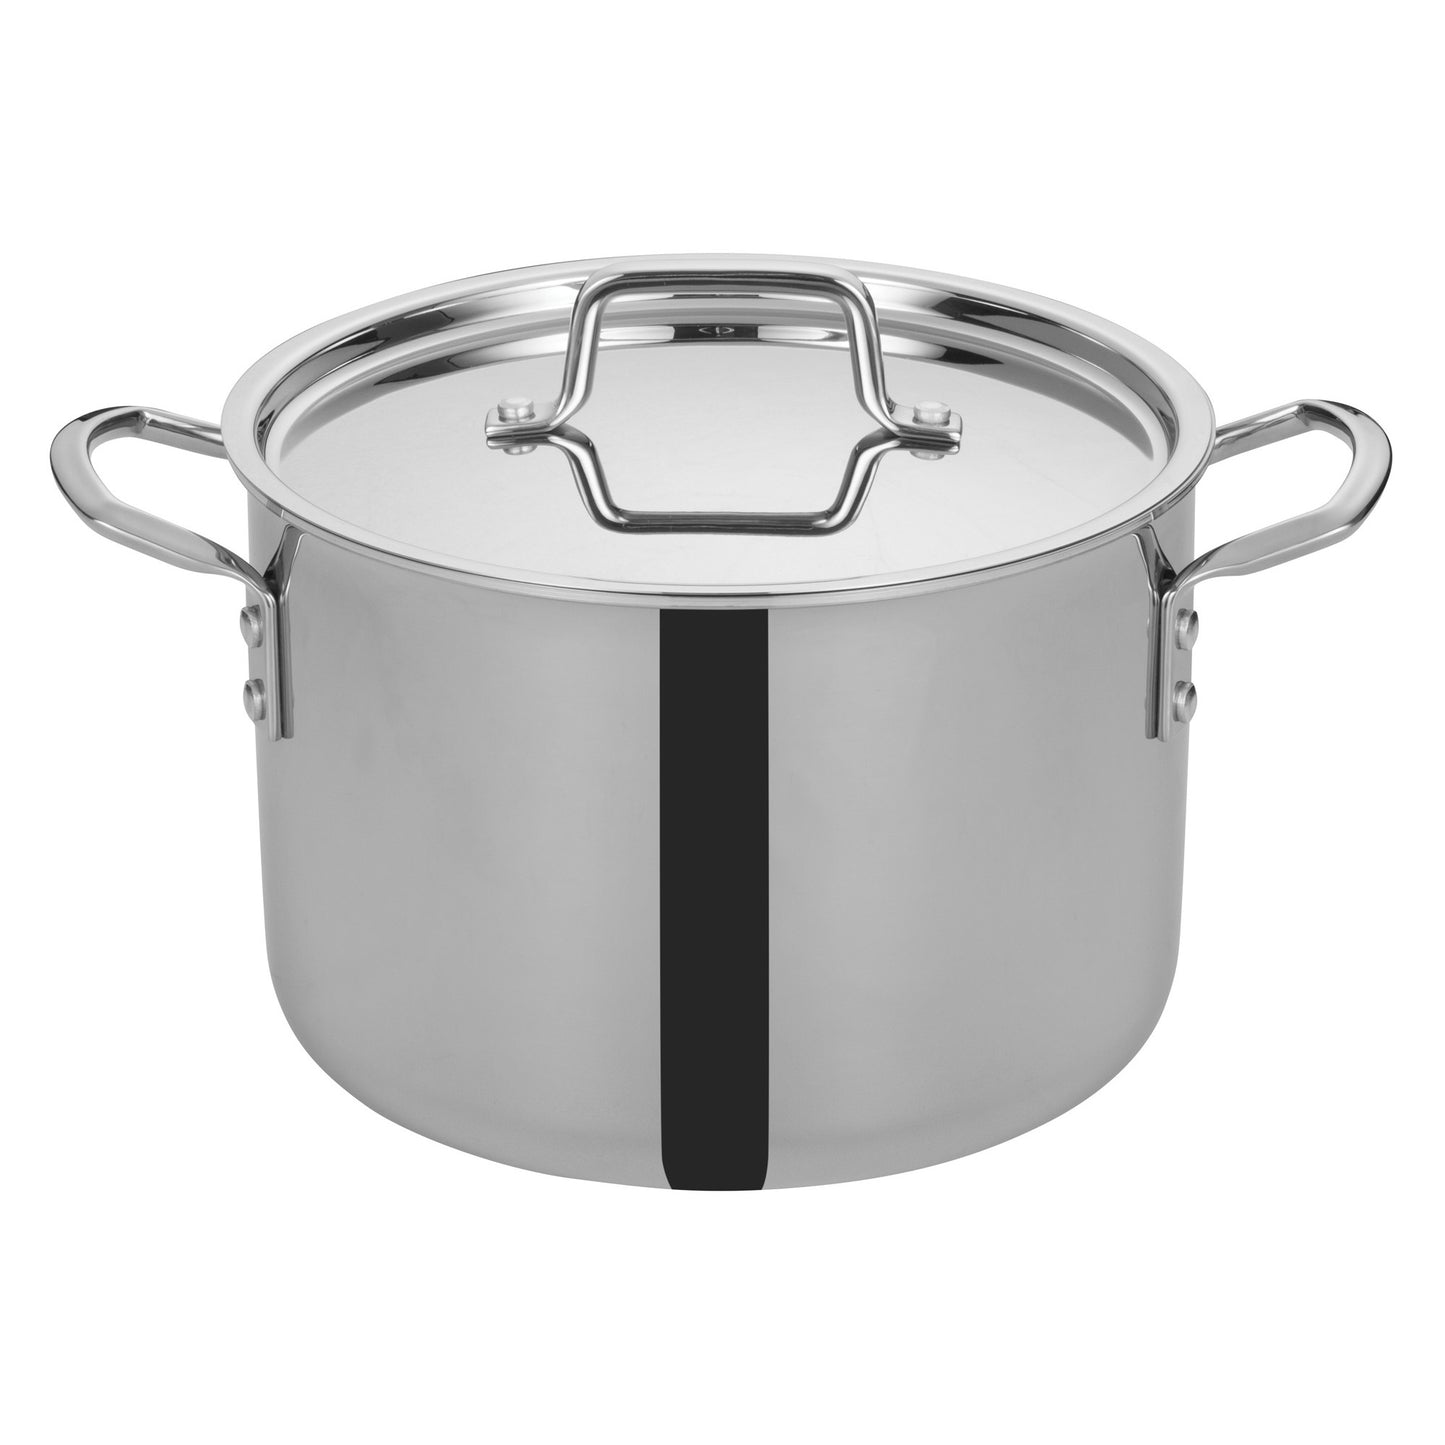 TGSP-8 - Tri-Gen Tri-Ply Stainless Steel Stock Pot with Cover - 8 Quart